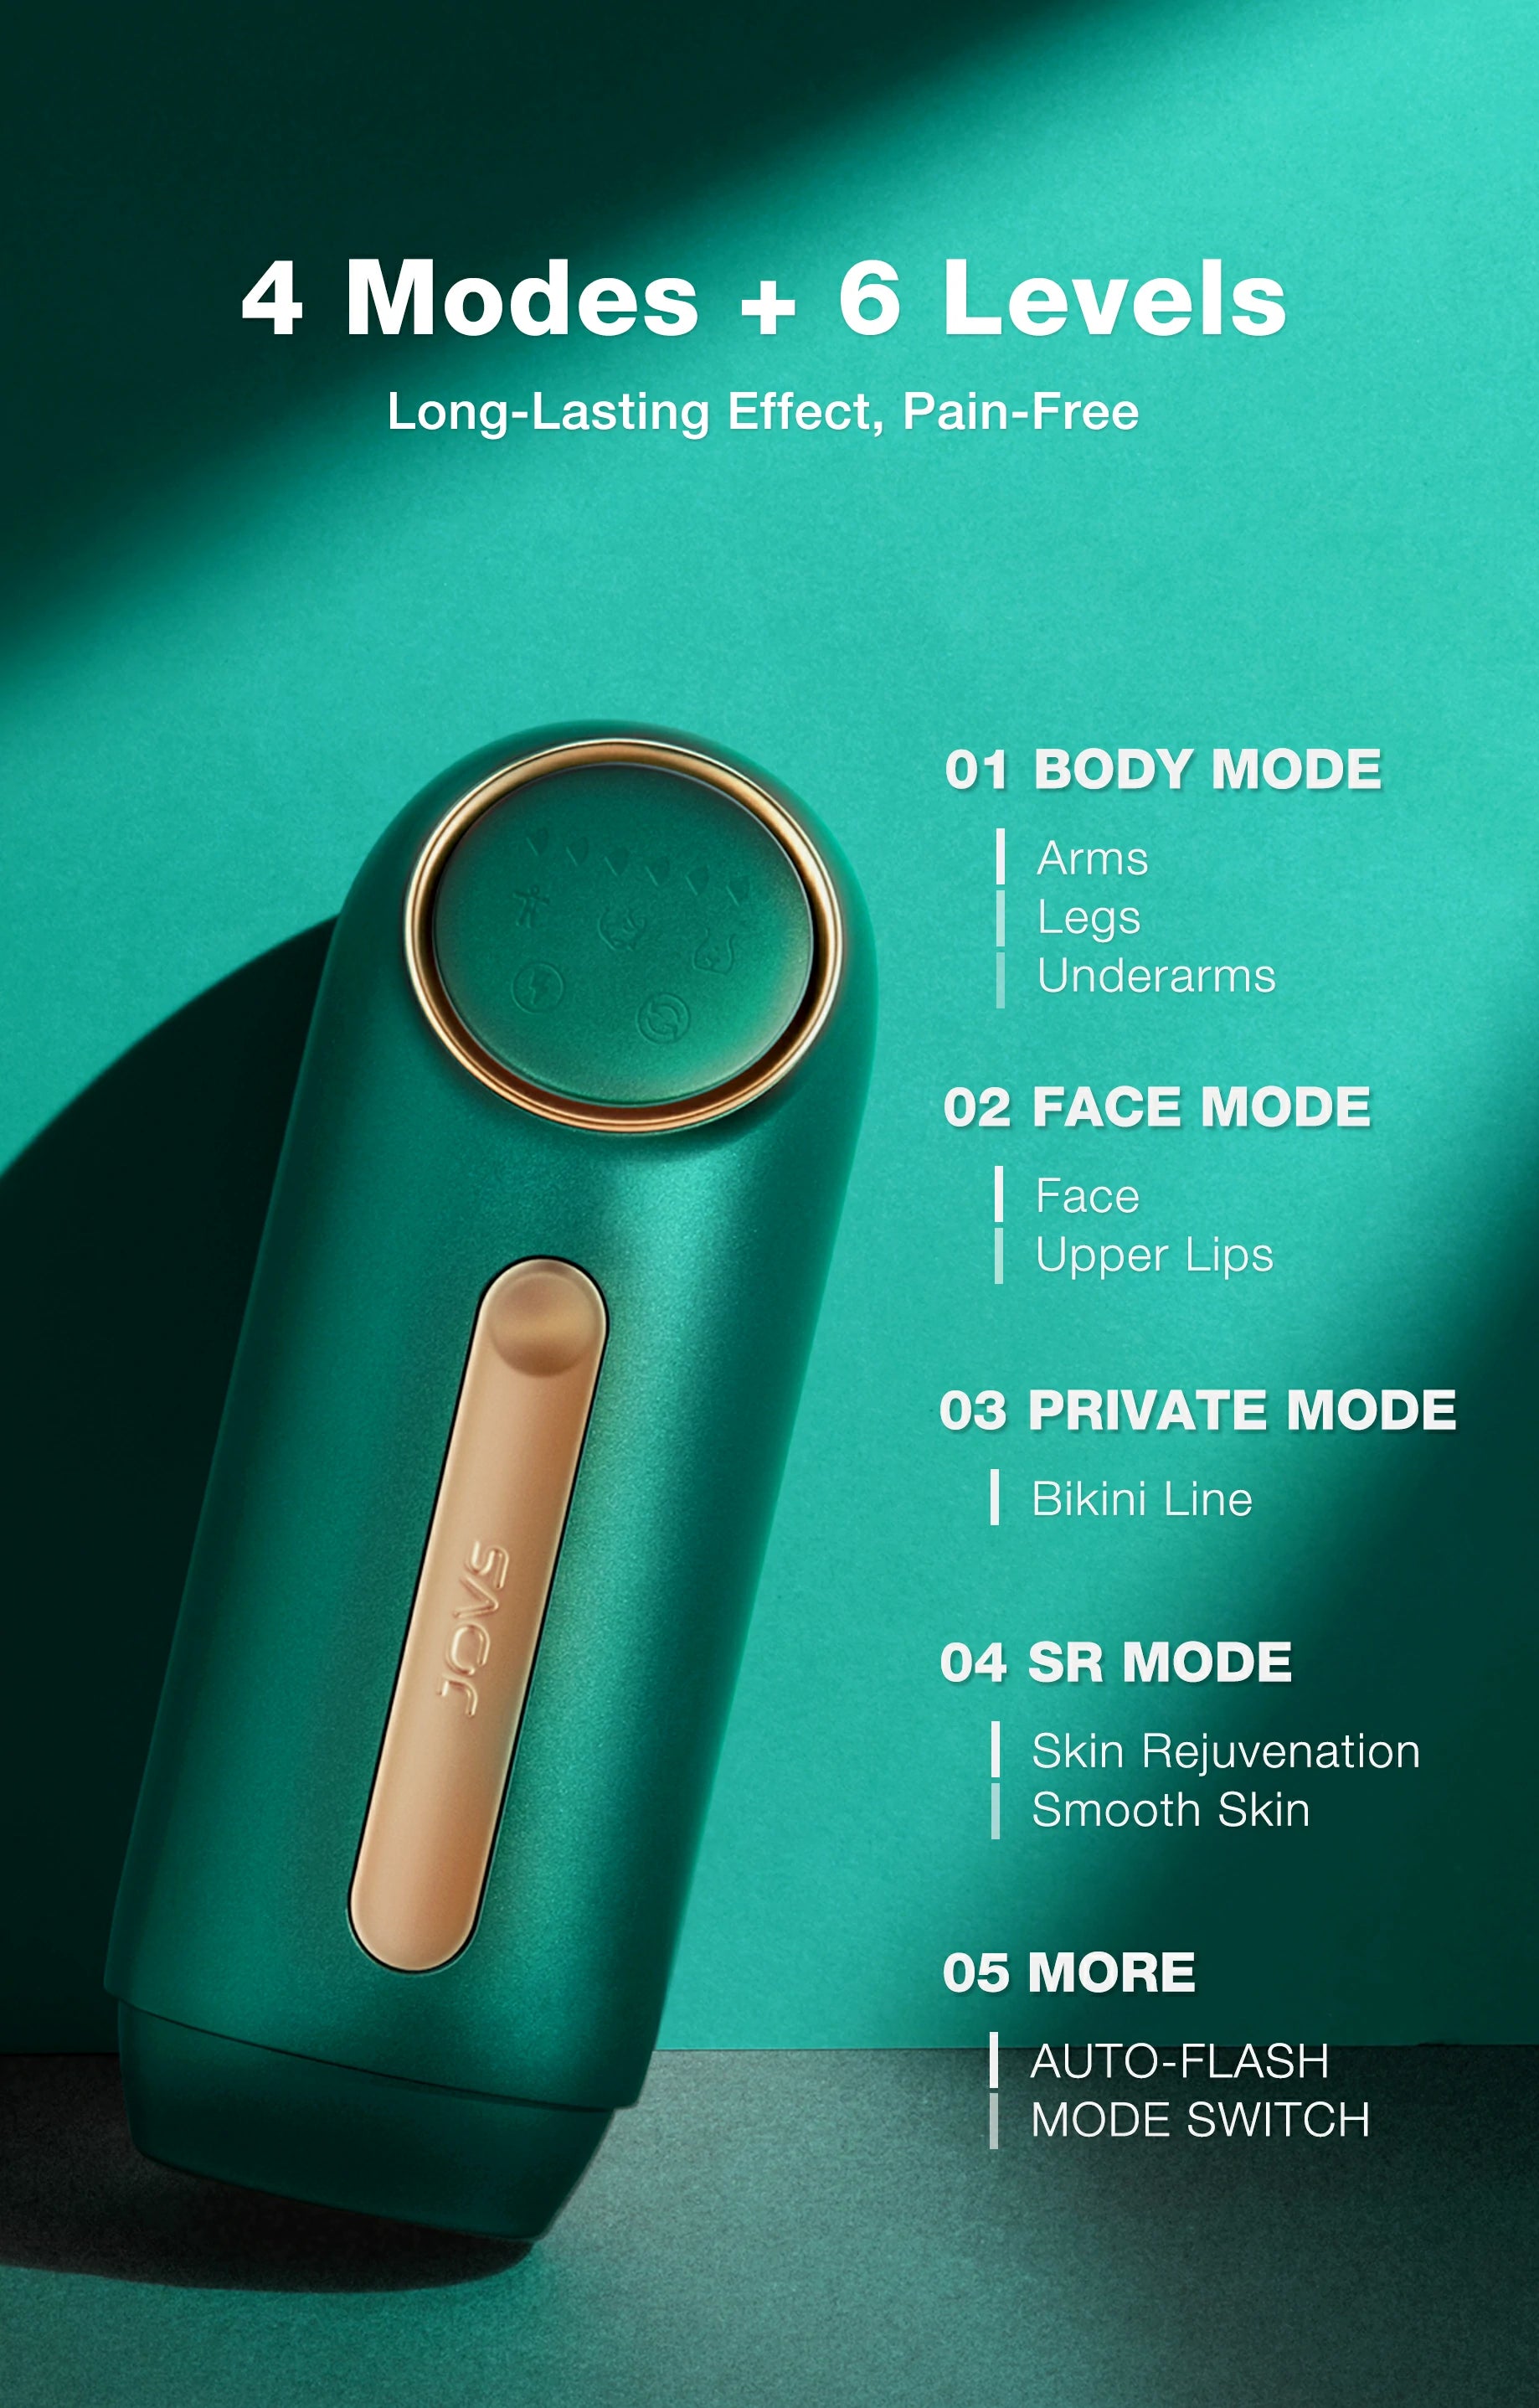 JOVS Mini Wireless IPL Hair Removal Device Displaying 4 Modes and 6 Levels for Body, Face, and Skin Rejuvenation